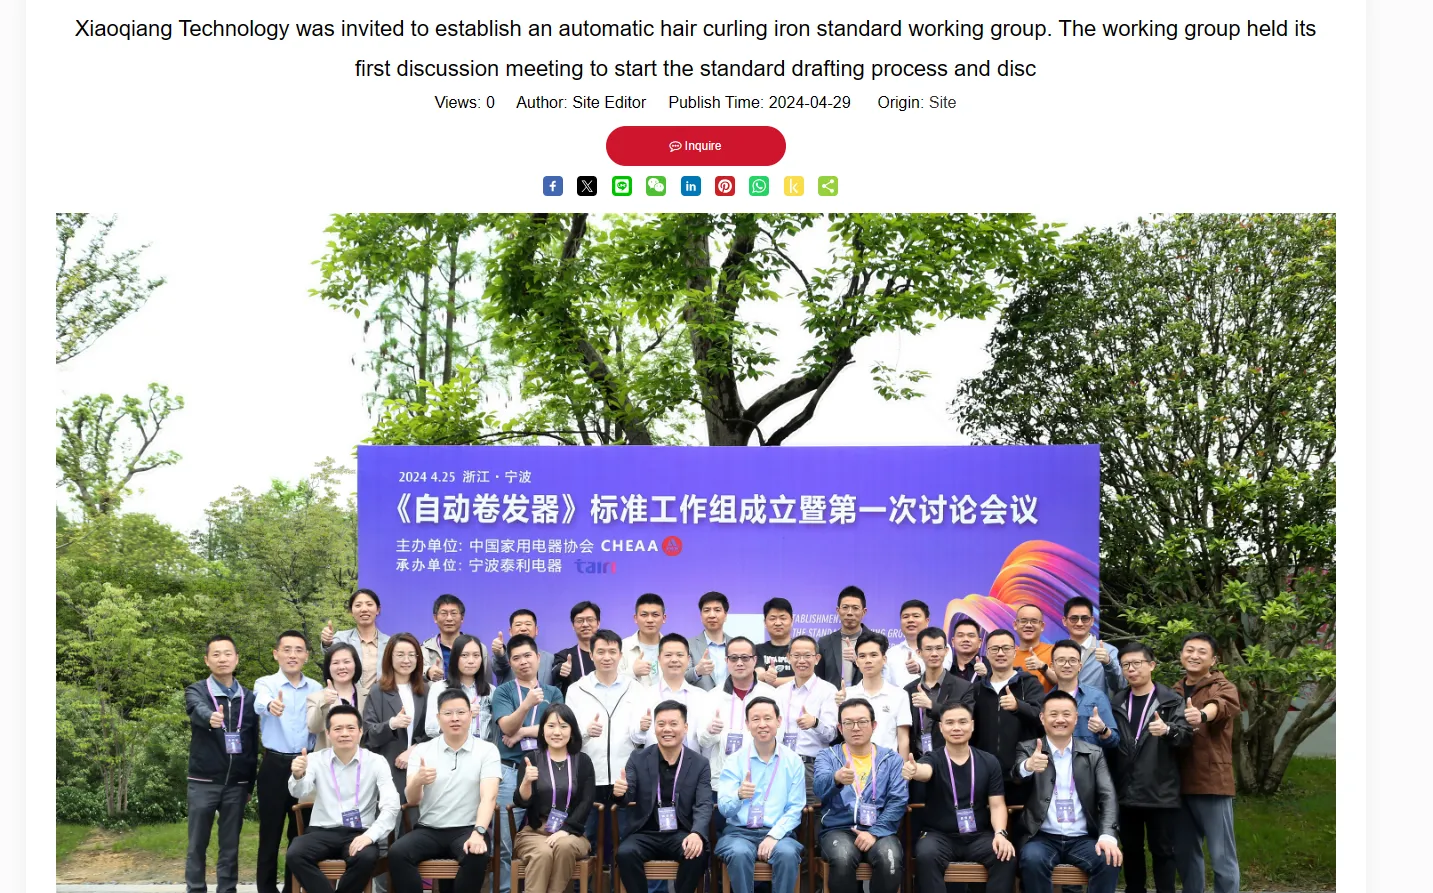 Xiaoqiang Technology was invited to establish a standard working group for automatic hair curlers